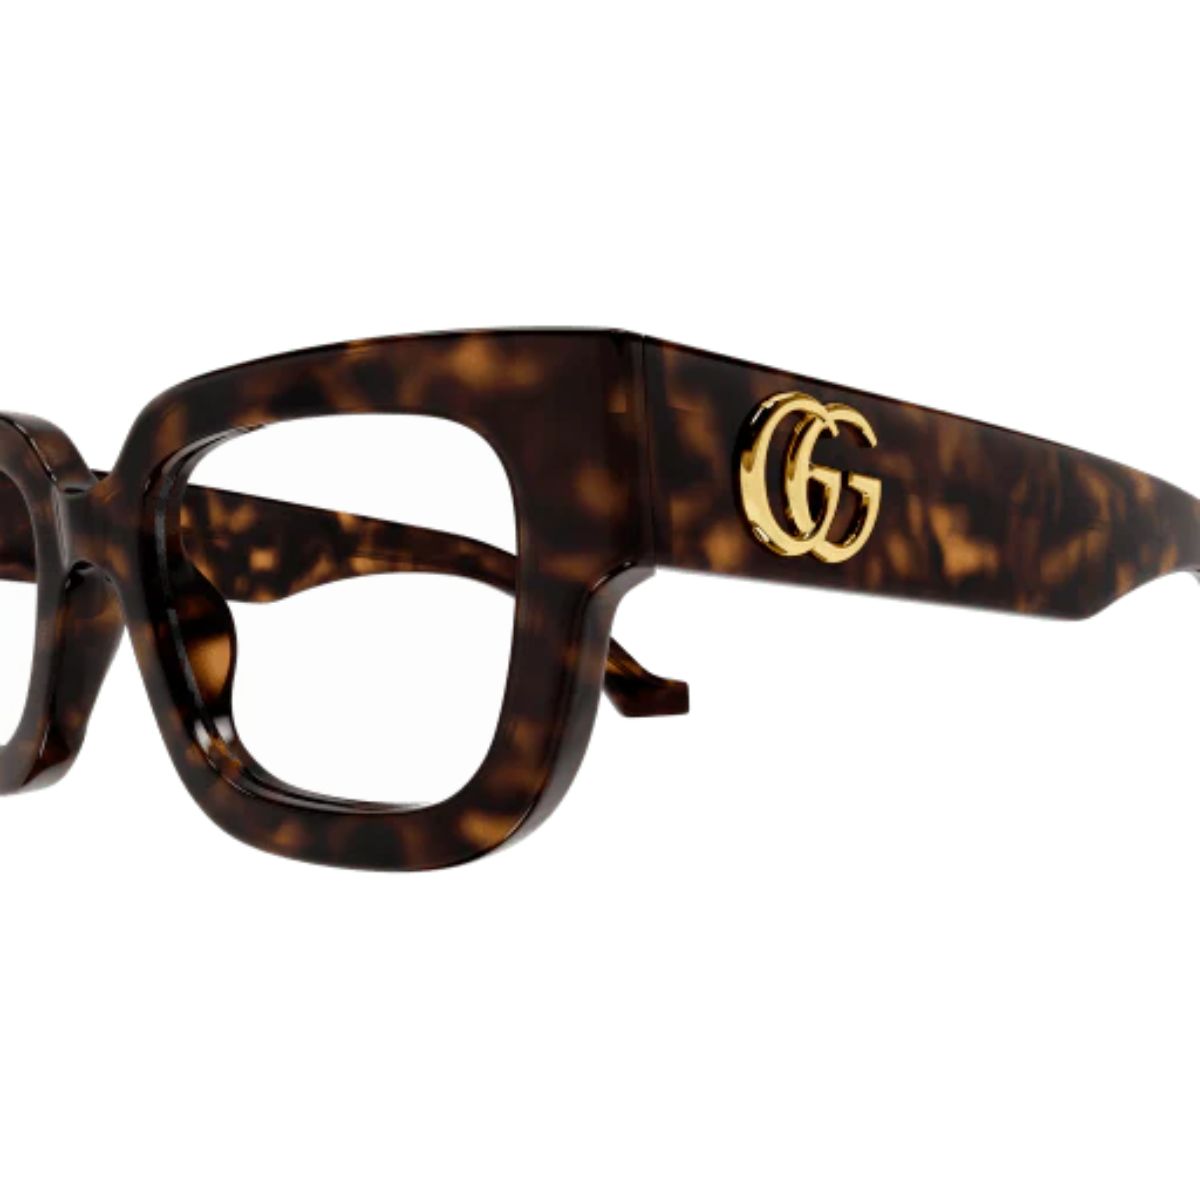 "Explore Fashionable Gucci Eyeglasses for Women - Optorium's Collection"